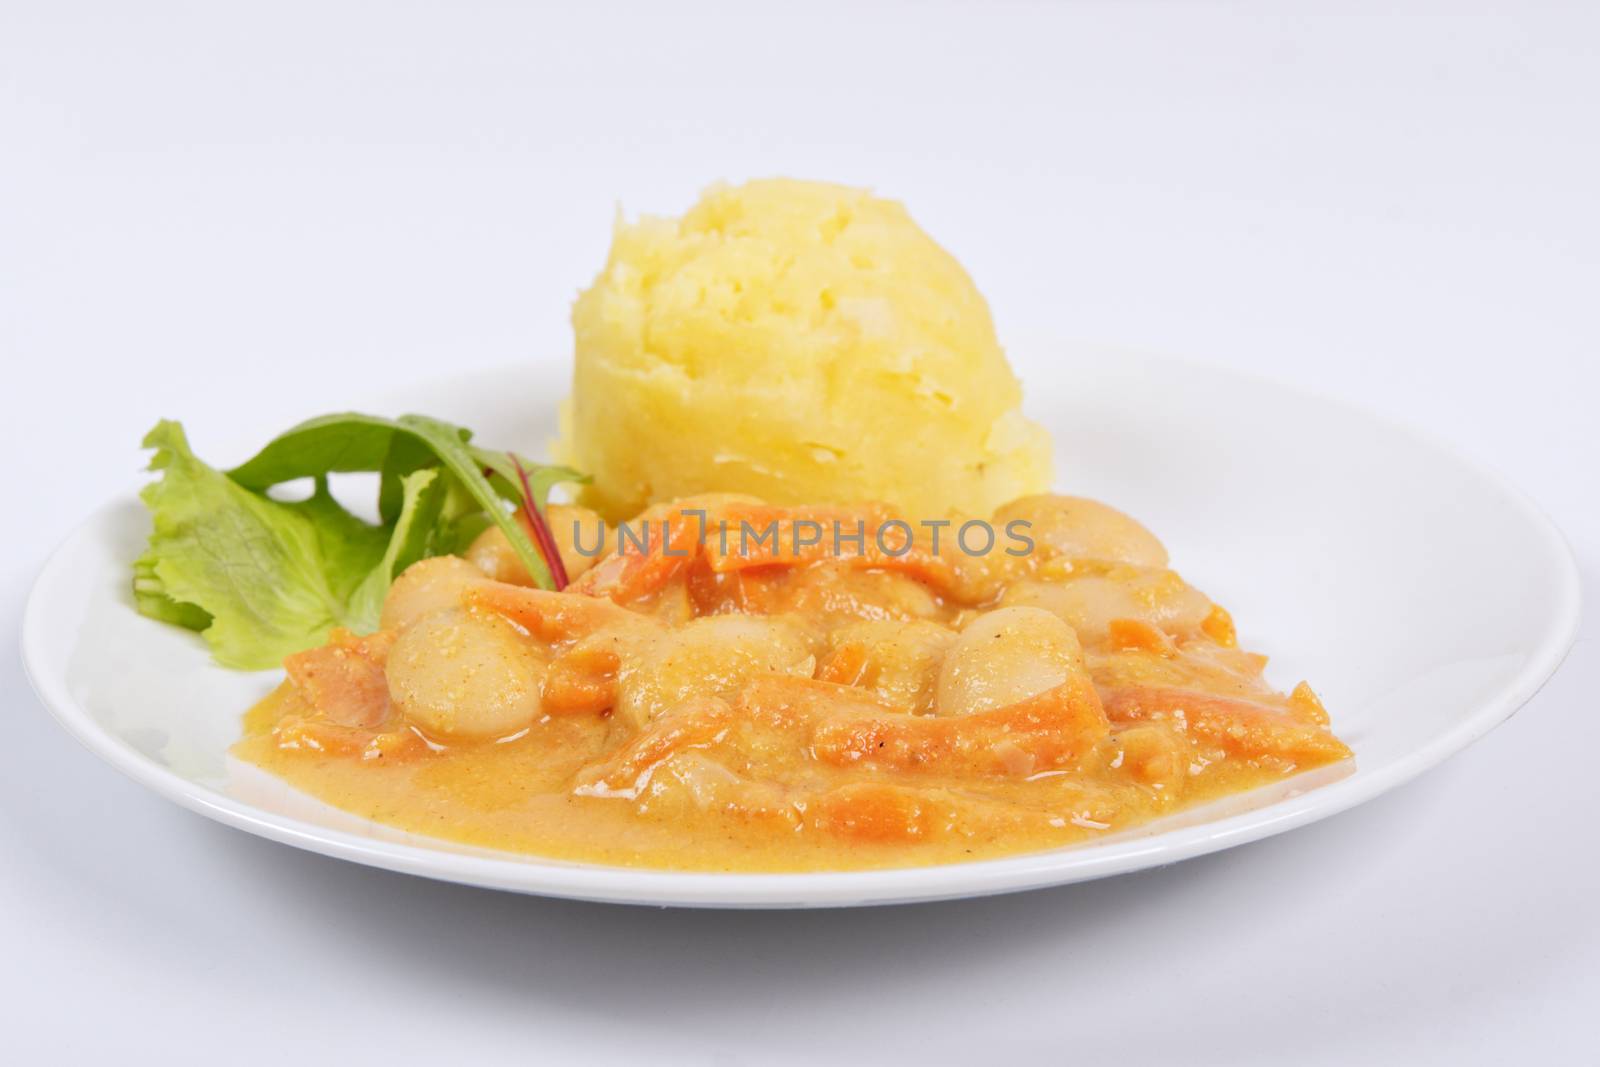 Beans with carrots and potatoes on a white background